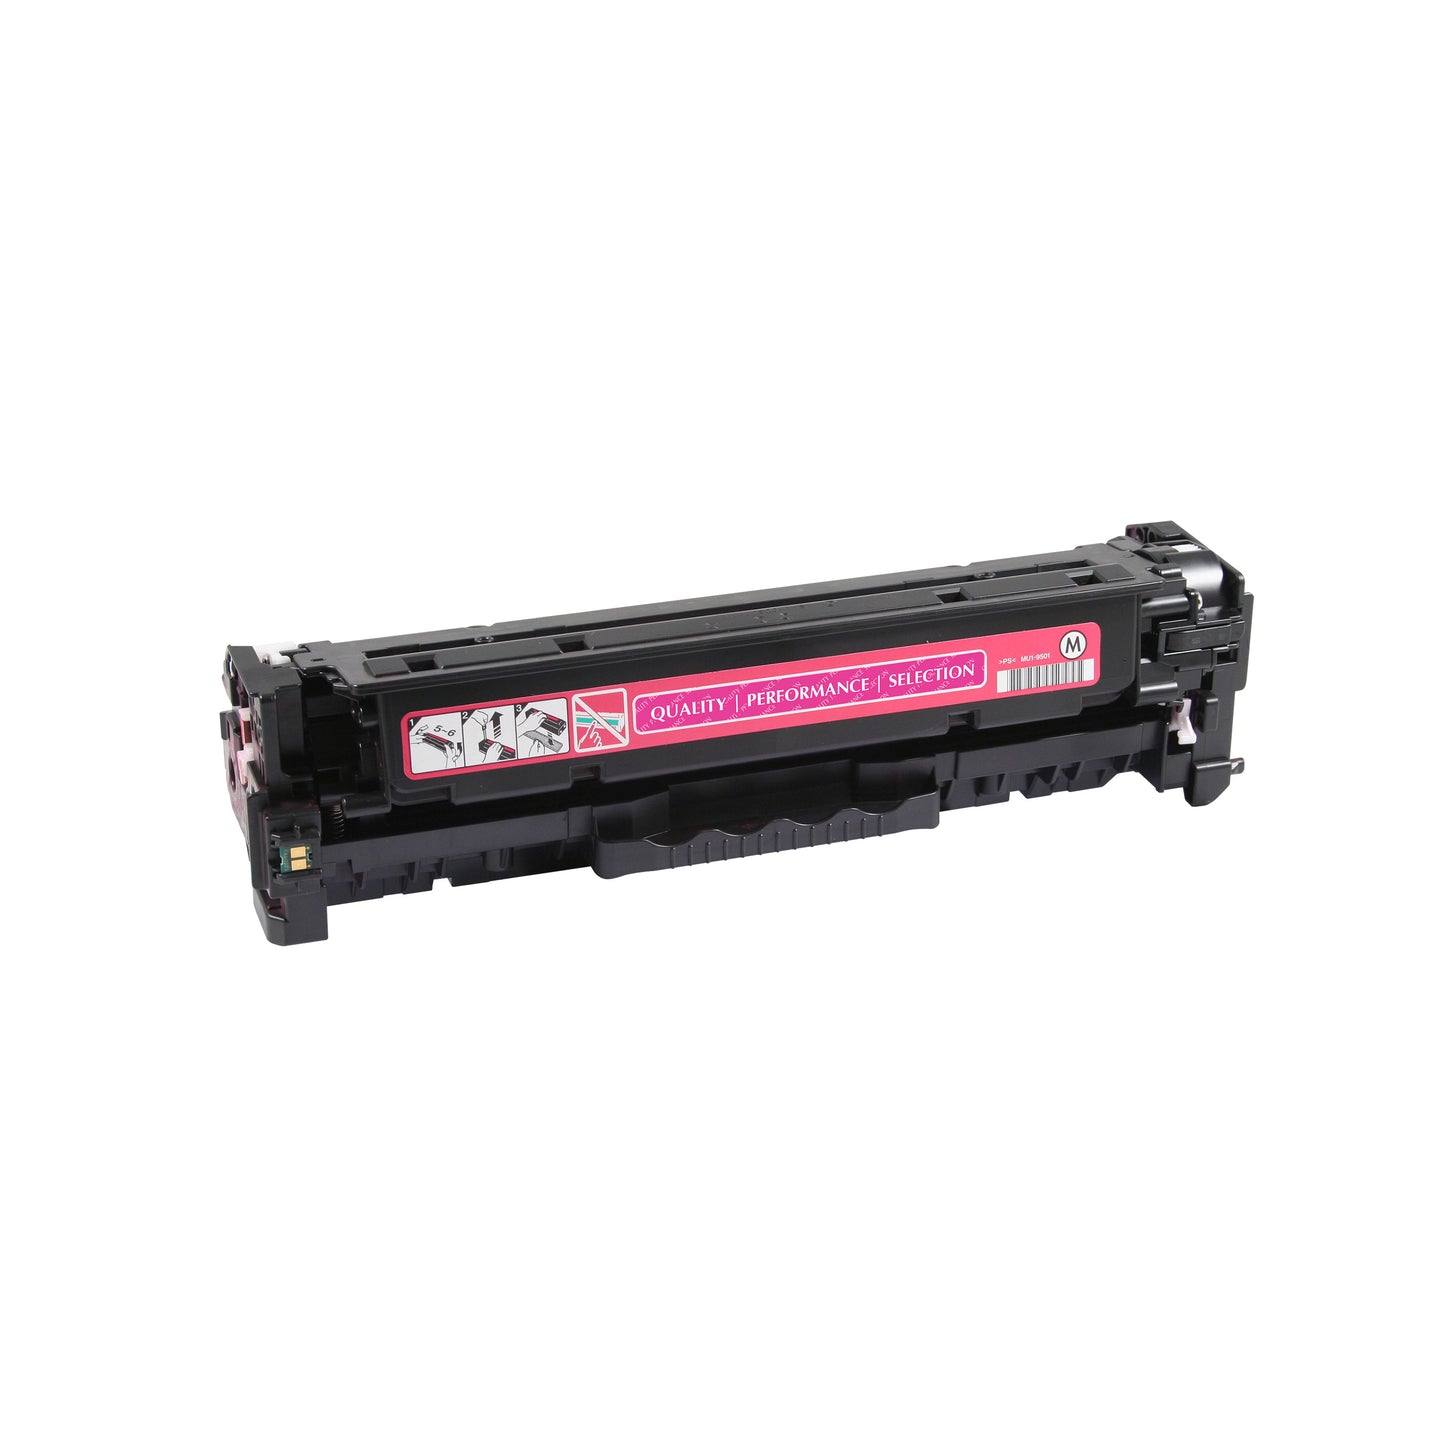 HP 312A (CF383A) Magenta Remanufactured Toner Cartridge [2,700 pages]